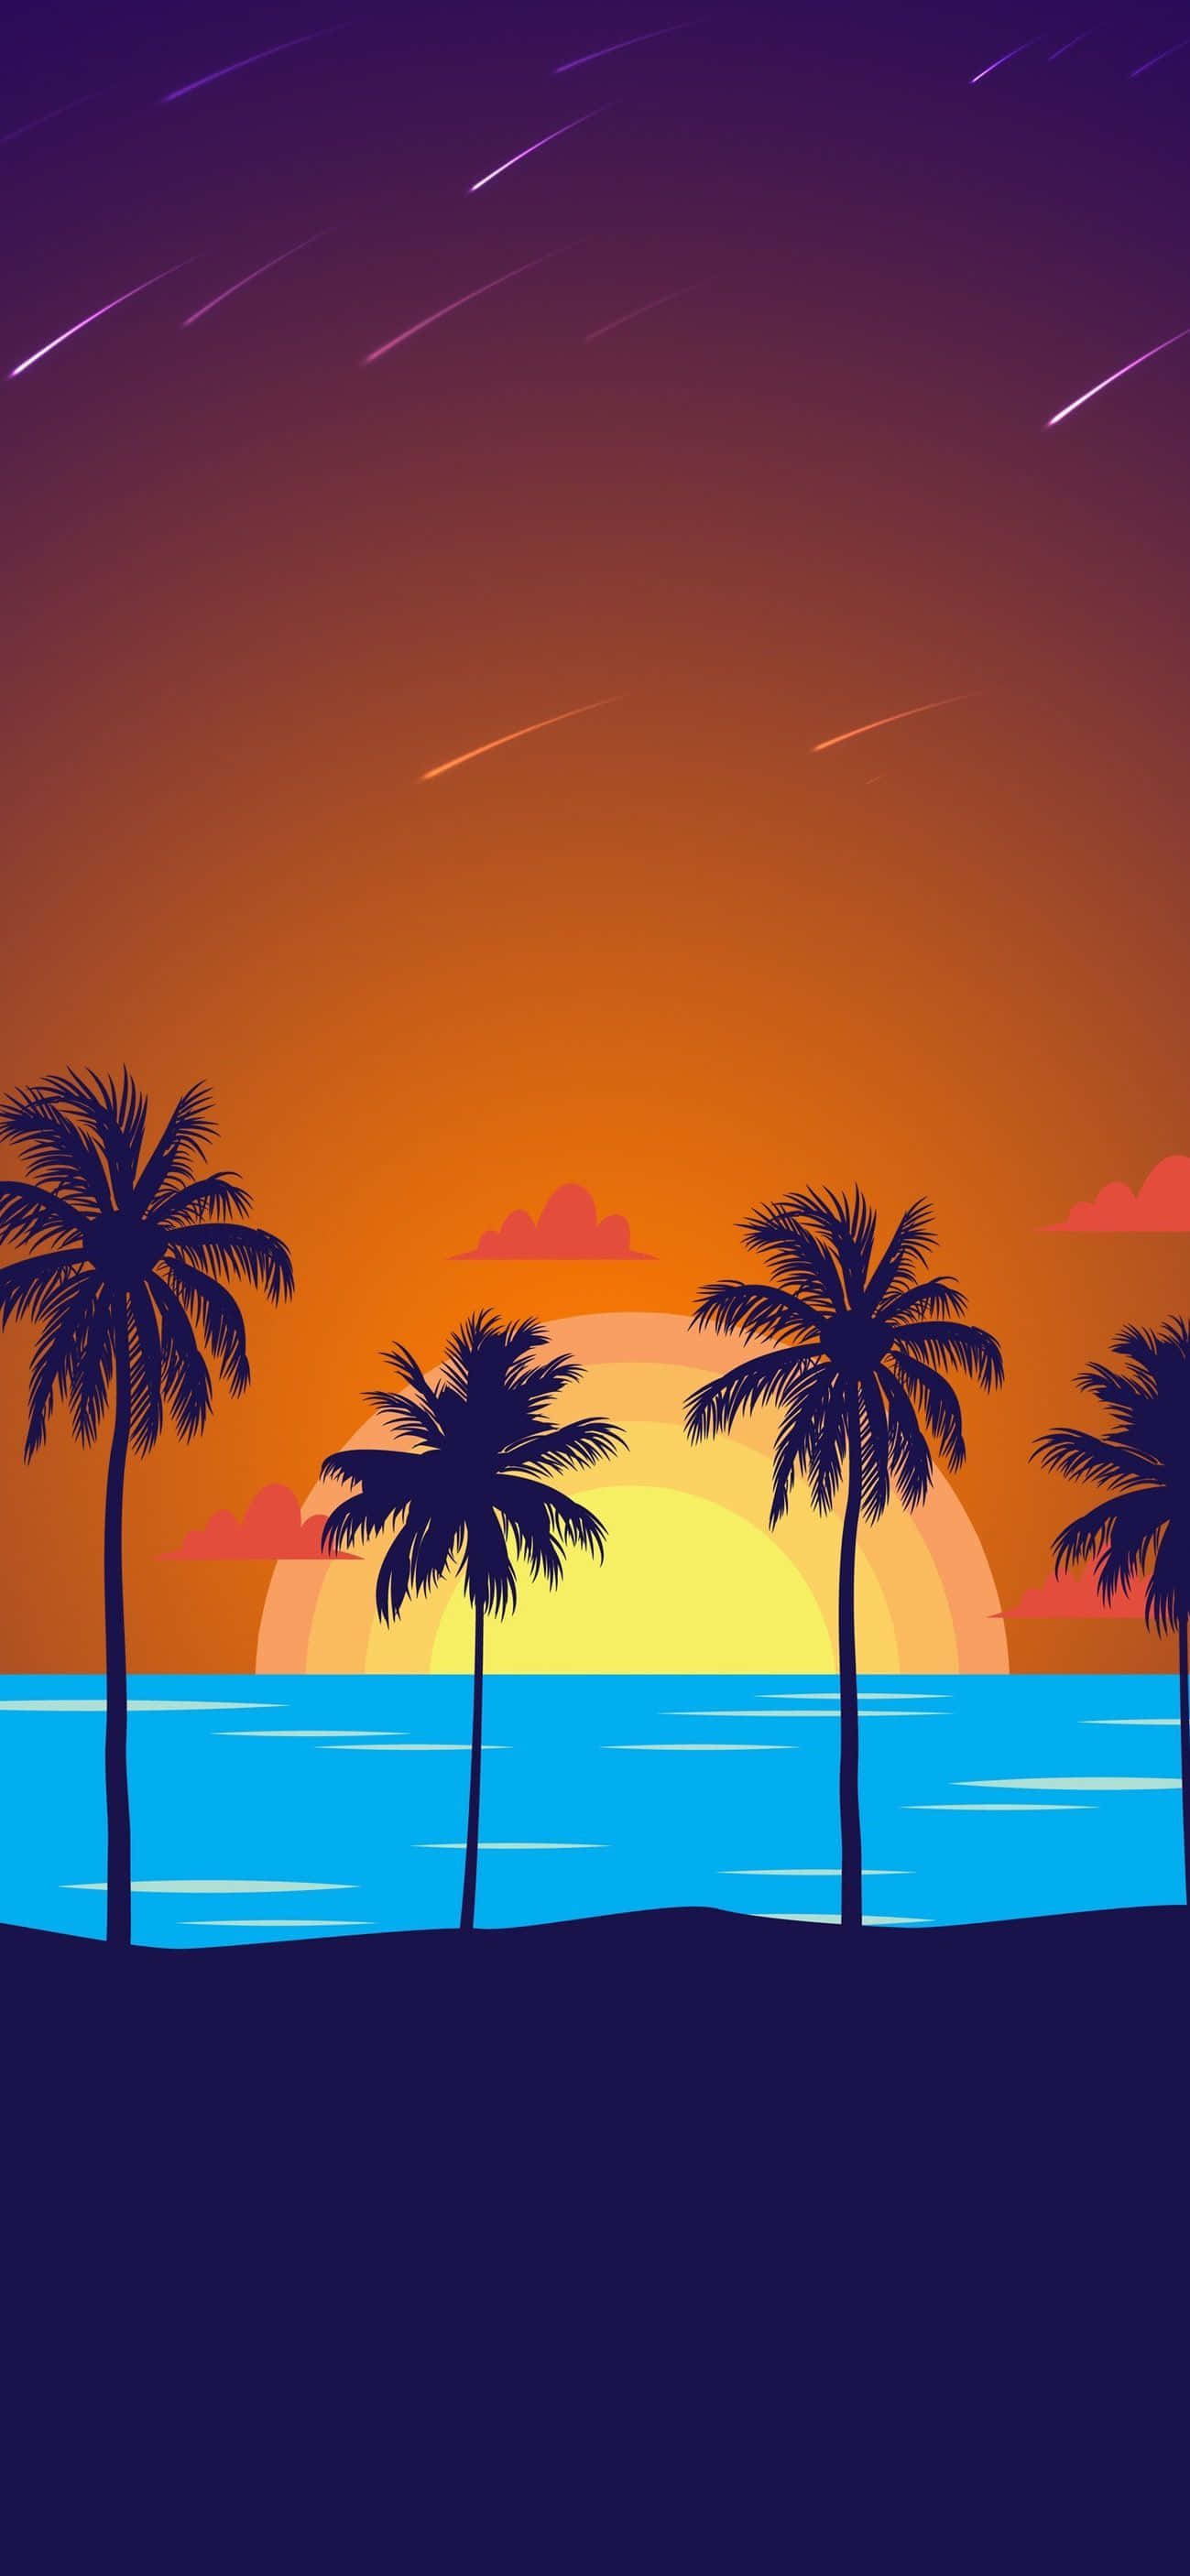 A Sunset With Palm Trees And The Ocean